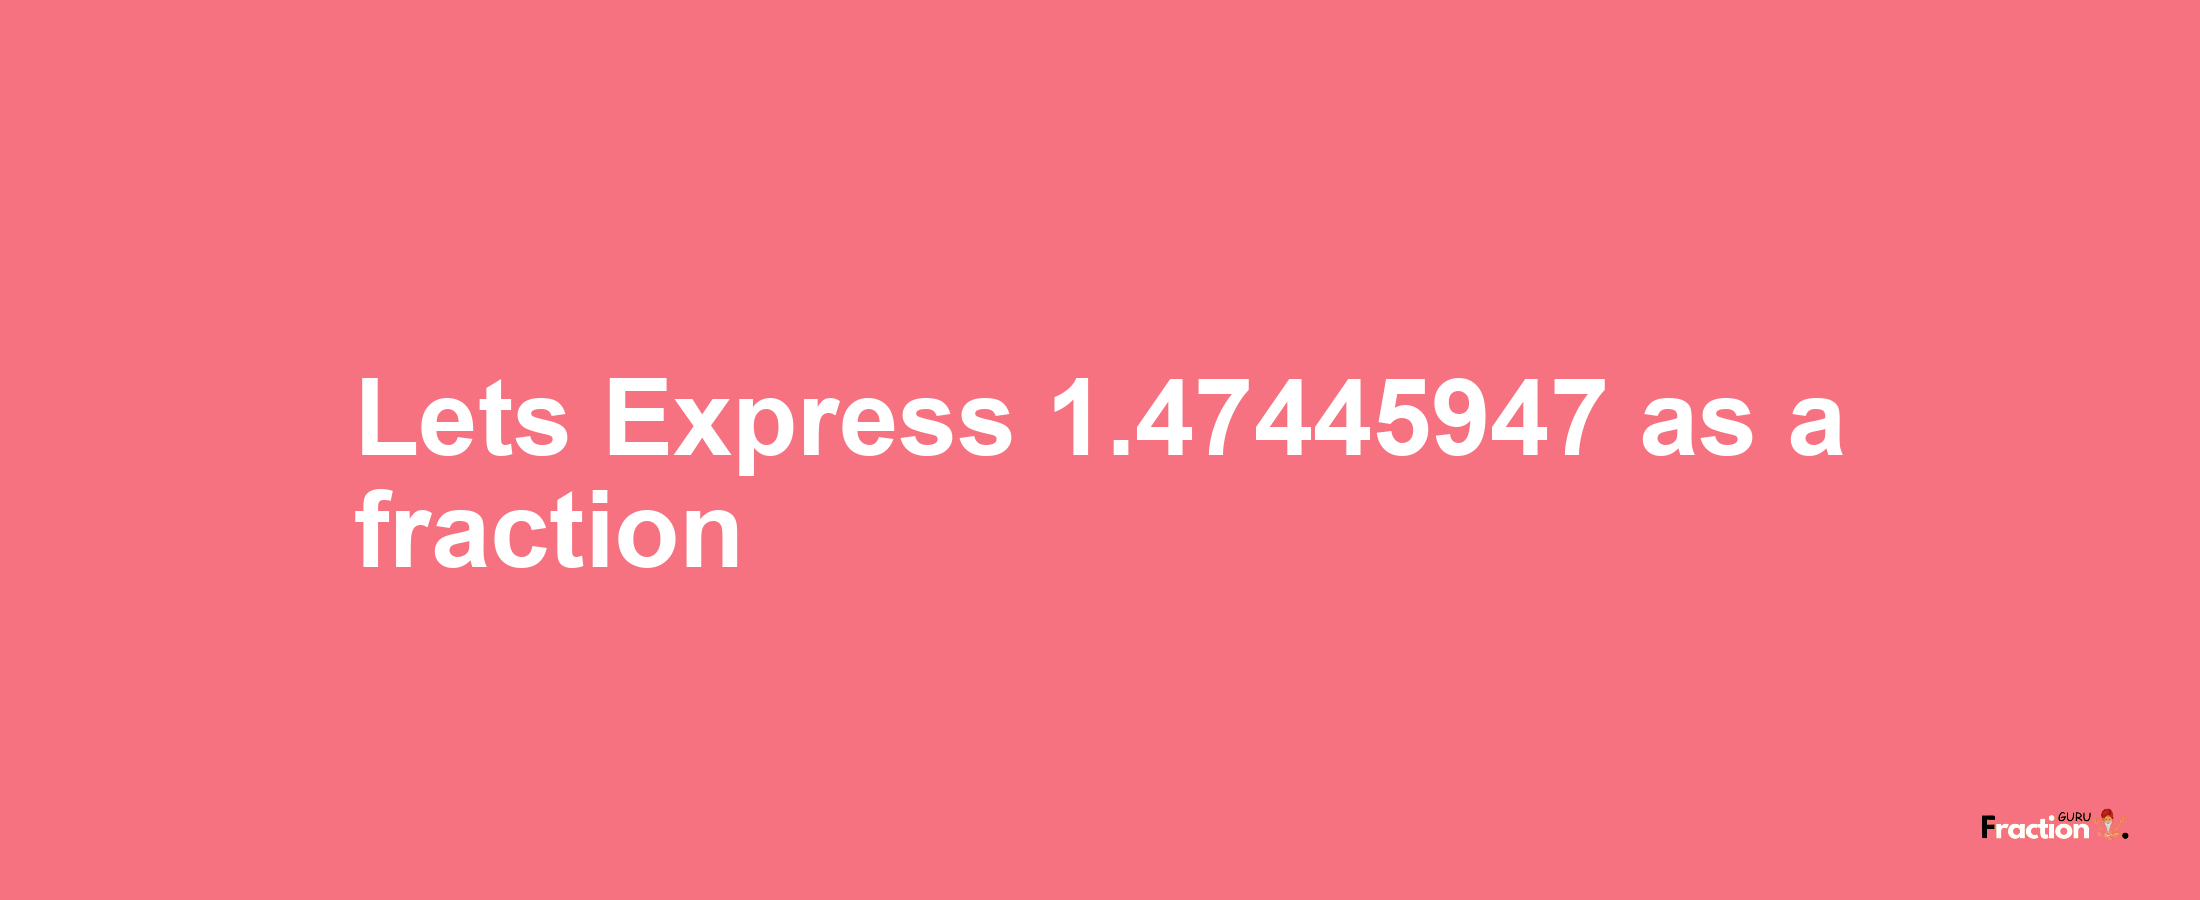 Lets Express 1.47445947 as afraction